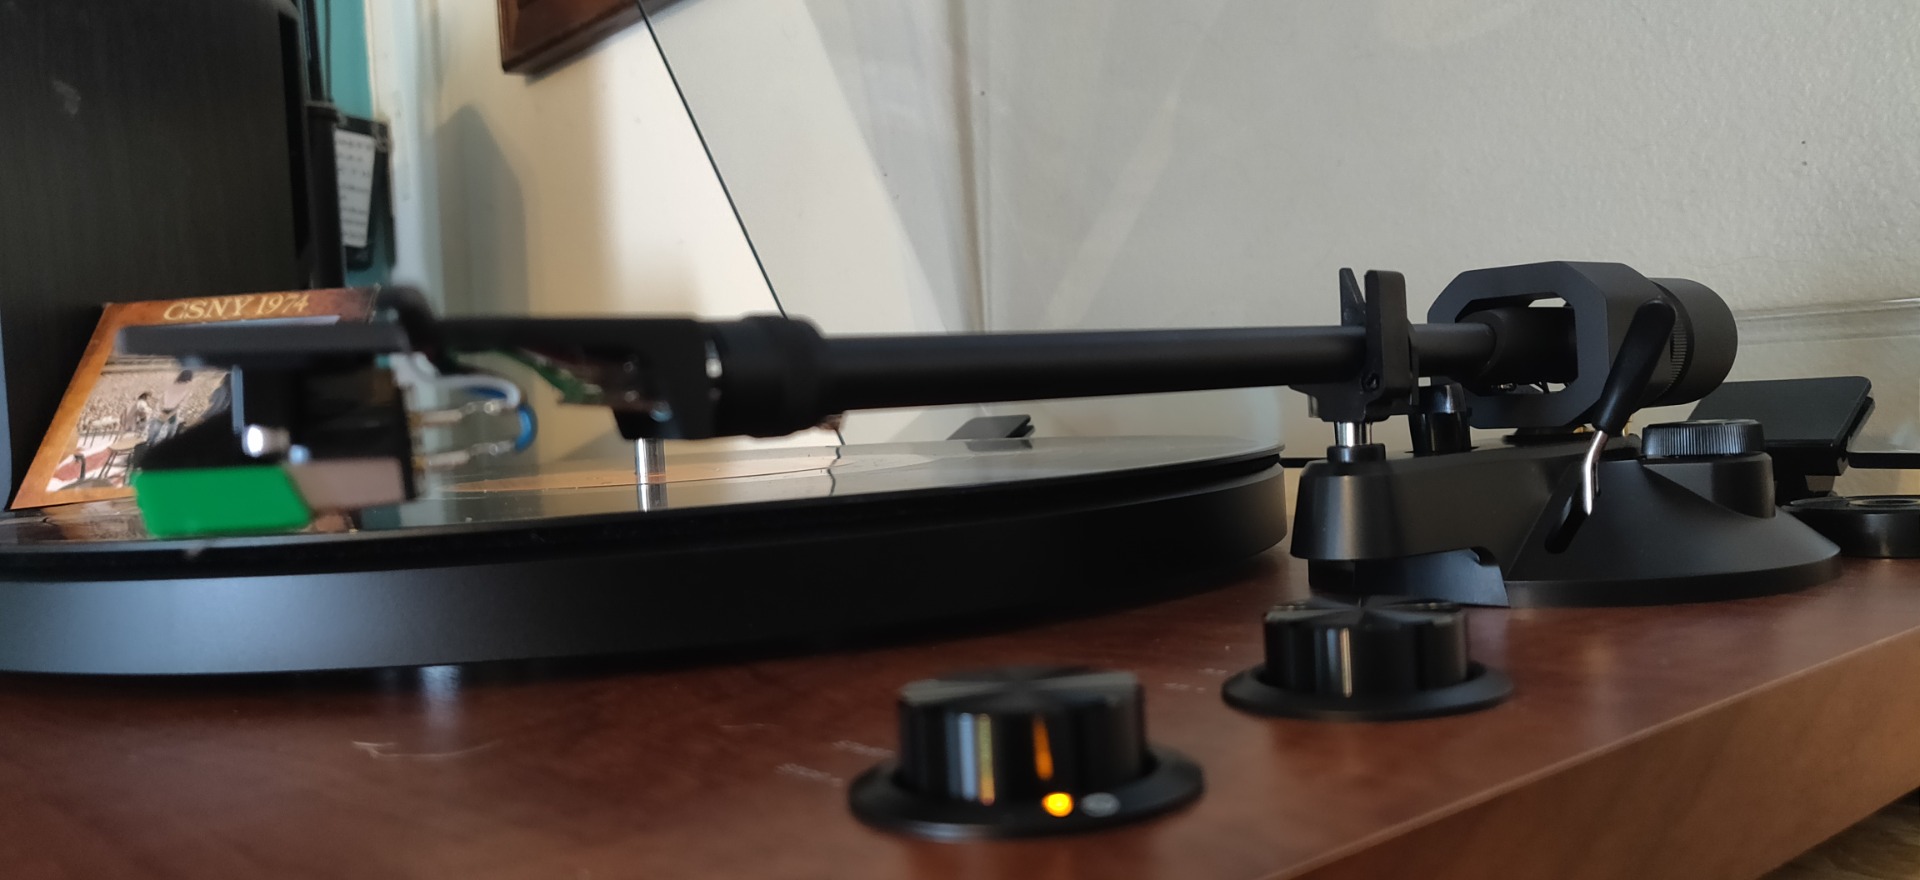 Customer Reviews: TEAC TN-280BT Manual belt-drive turntable with  pre-mounted cartridge, Bluetooth®, and built-in phono preamp at Crutchfield